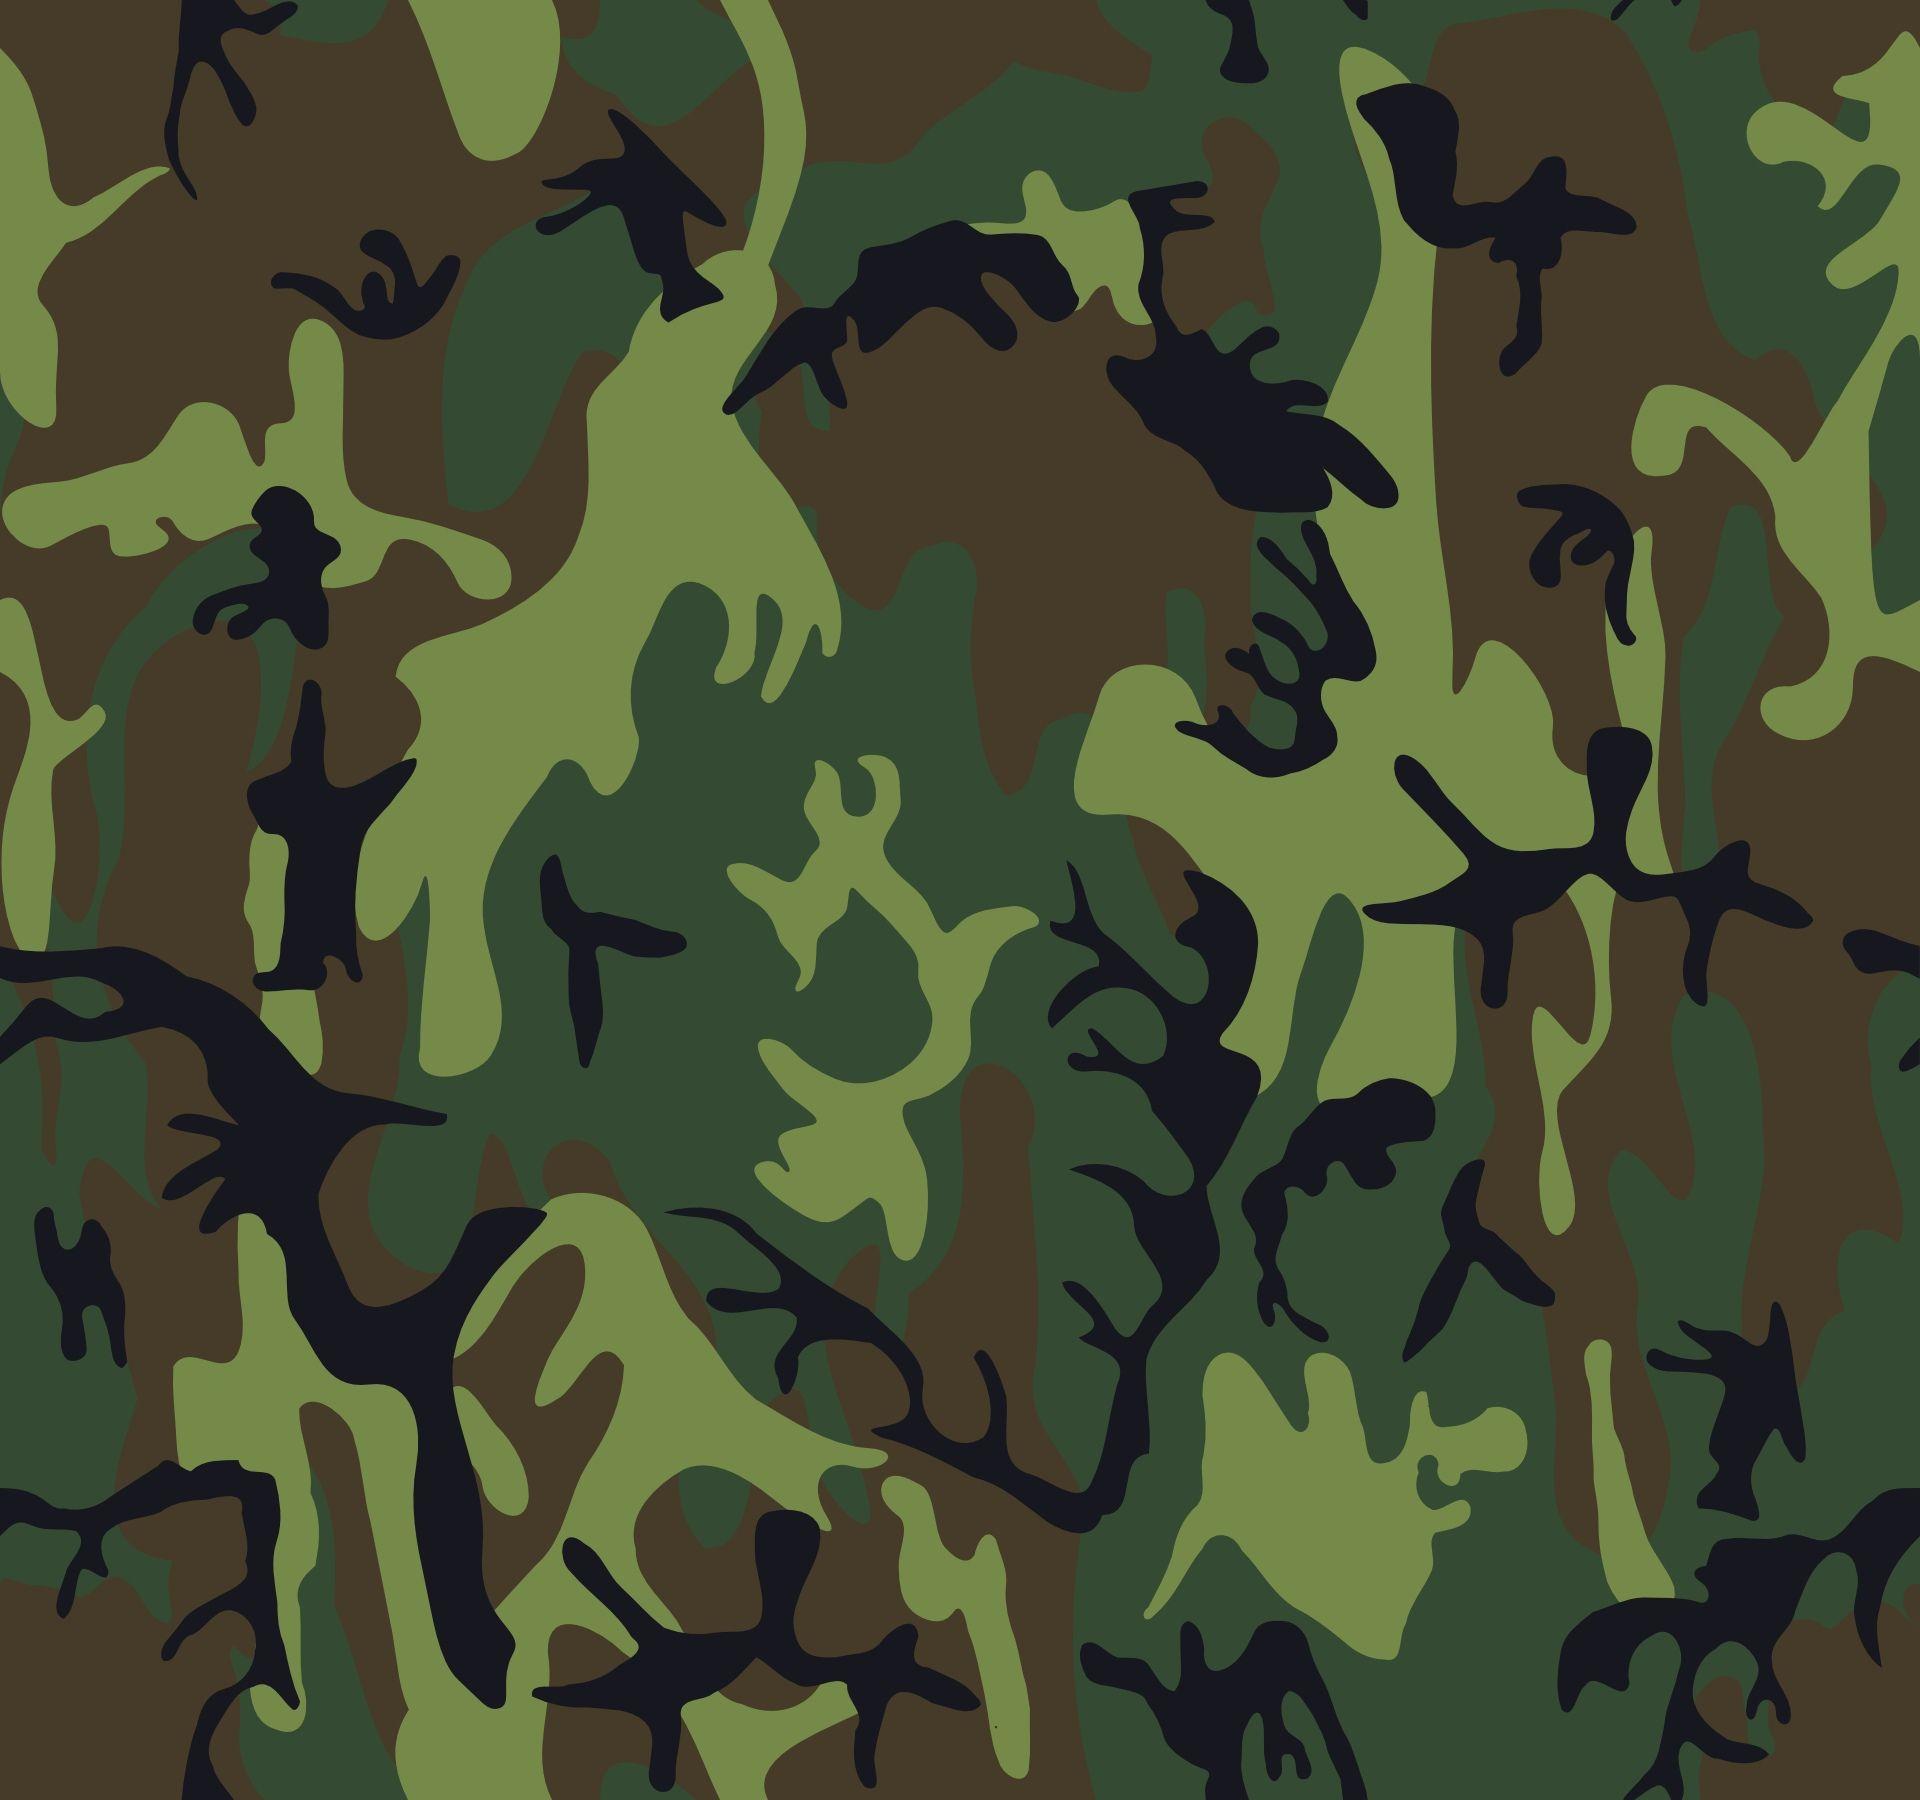 Army Camouflage Photo Textures Gallery. by ATextures.com